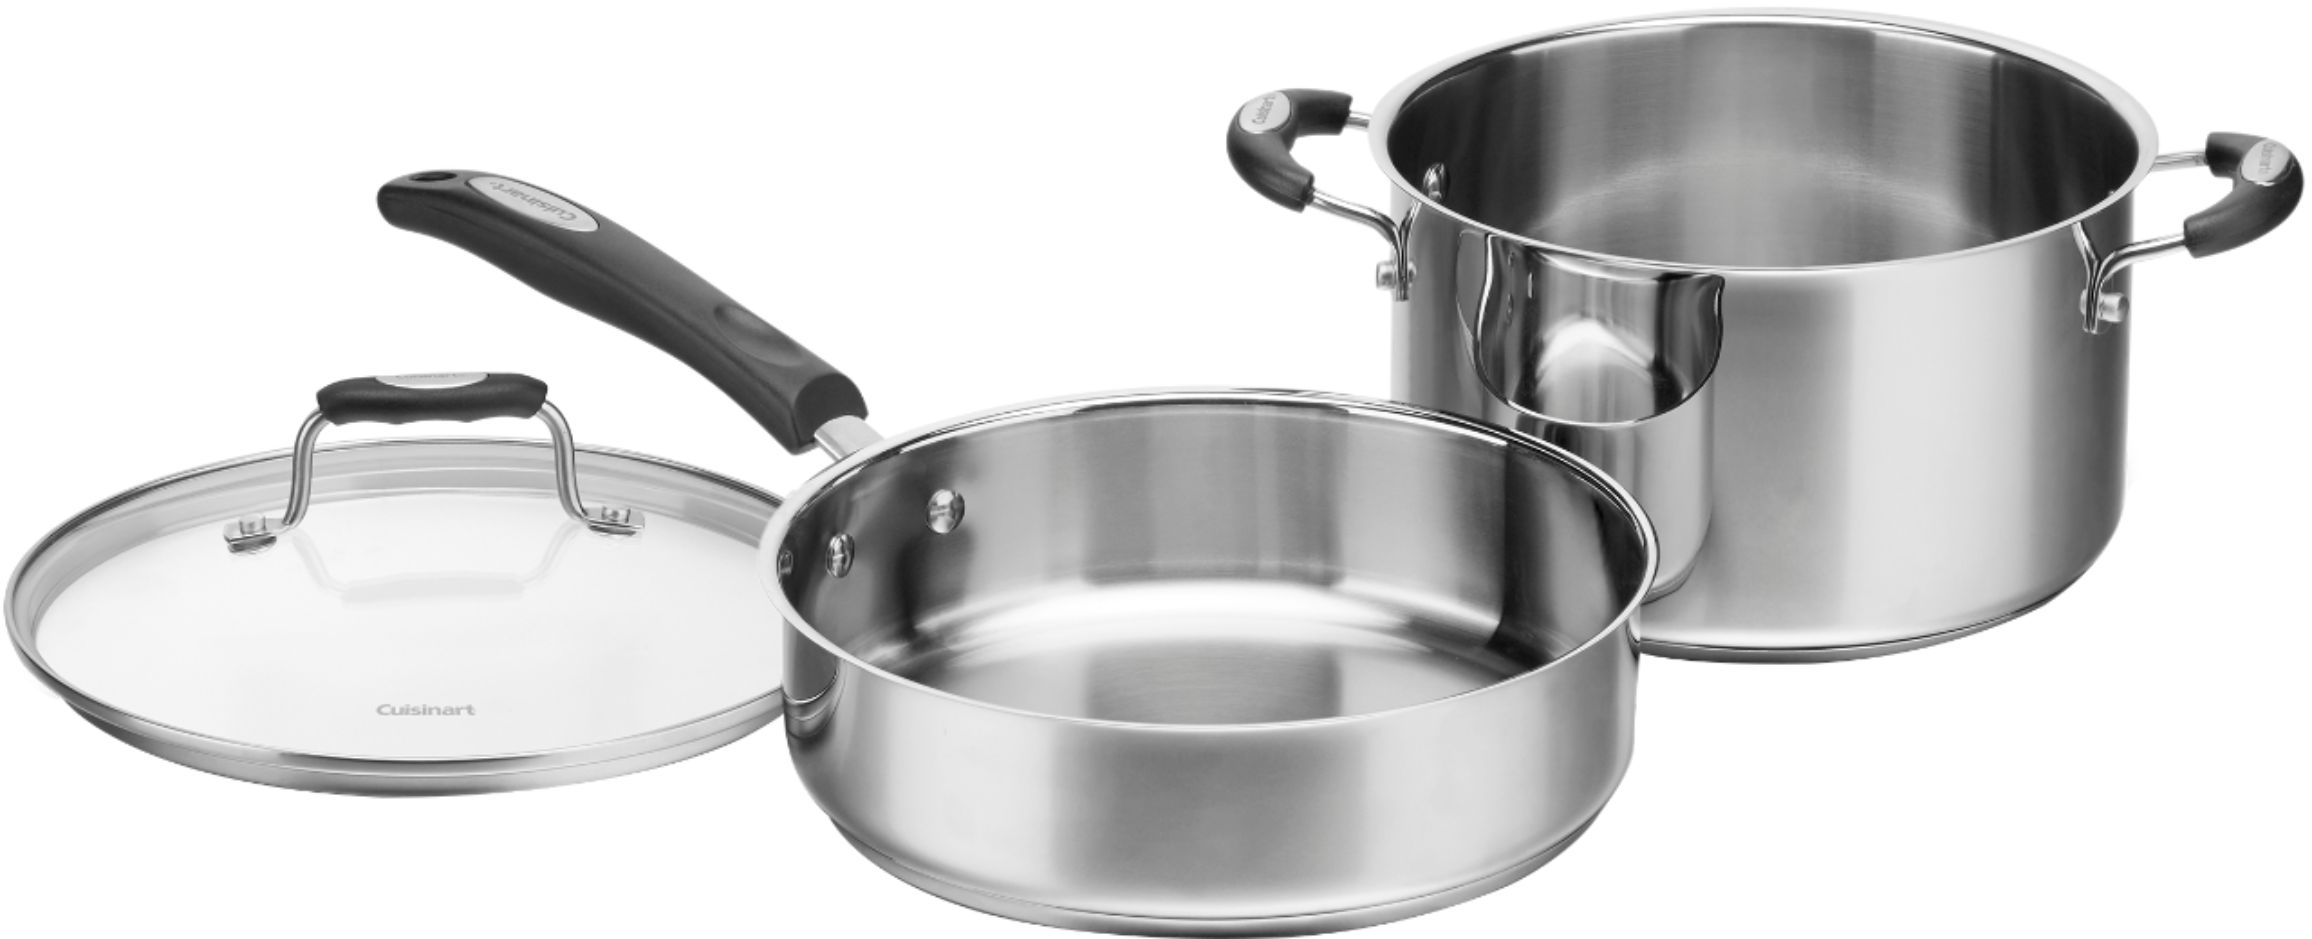 The most beautiful Cuisinart pots and pans we've ever seen are on